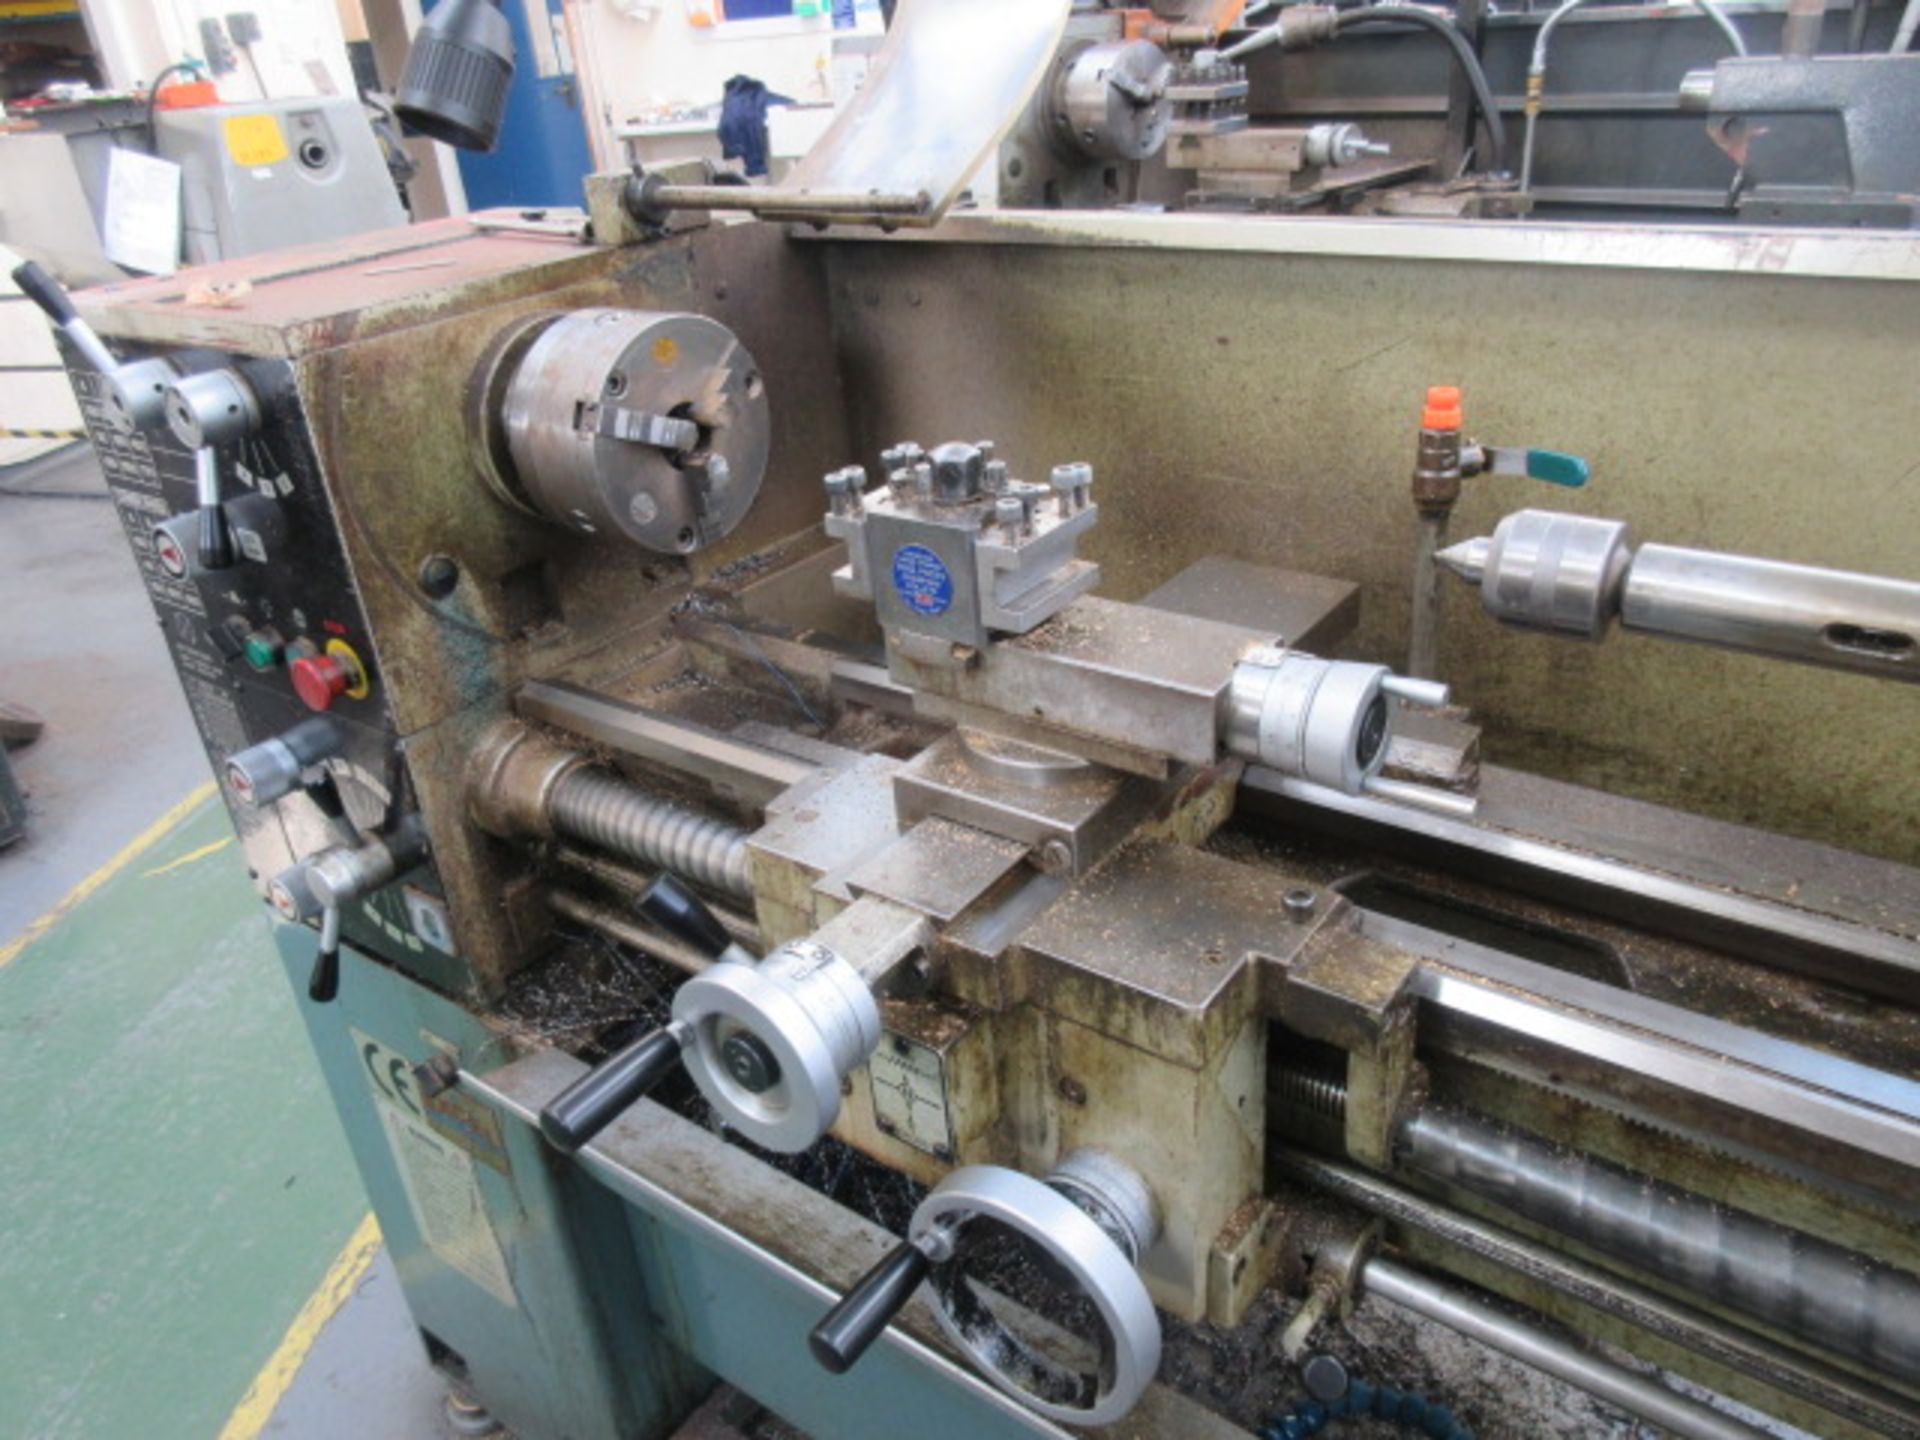 Excel XL-1440 GE 350mm dia x 1000mm gap bed lathe with 3 jaw chuck, tailstock, quick change toolpost - Image 2 of 3